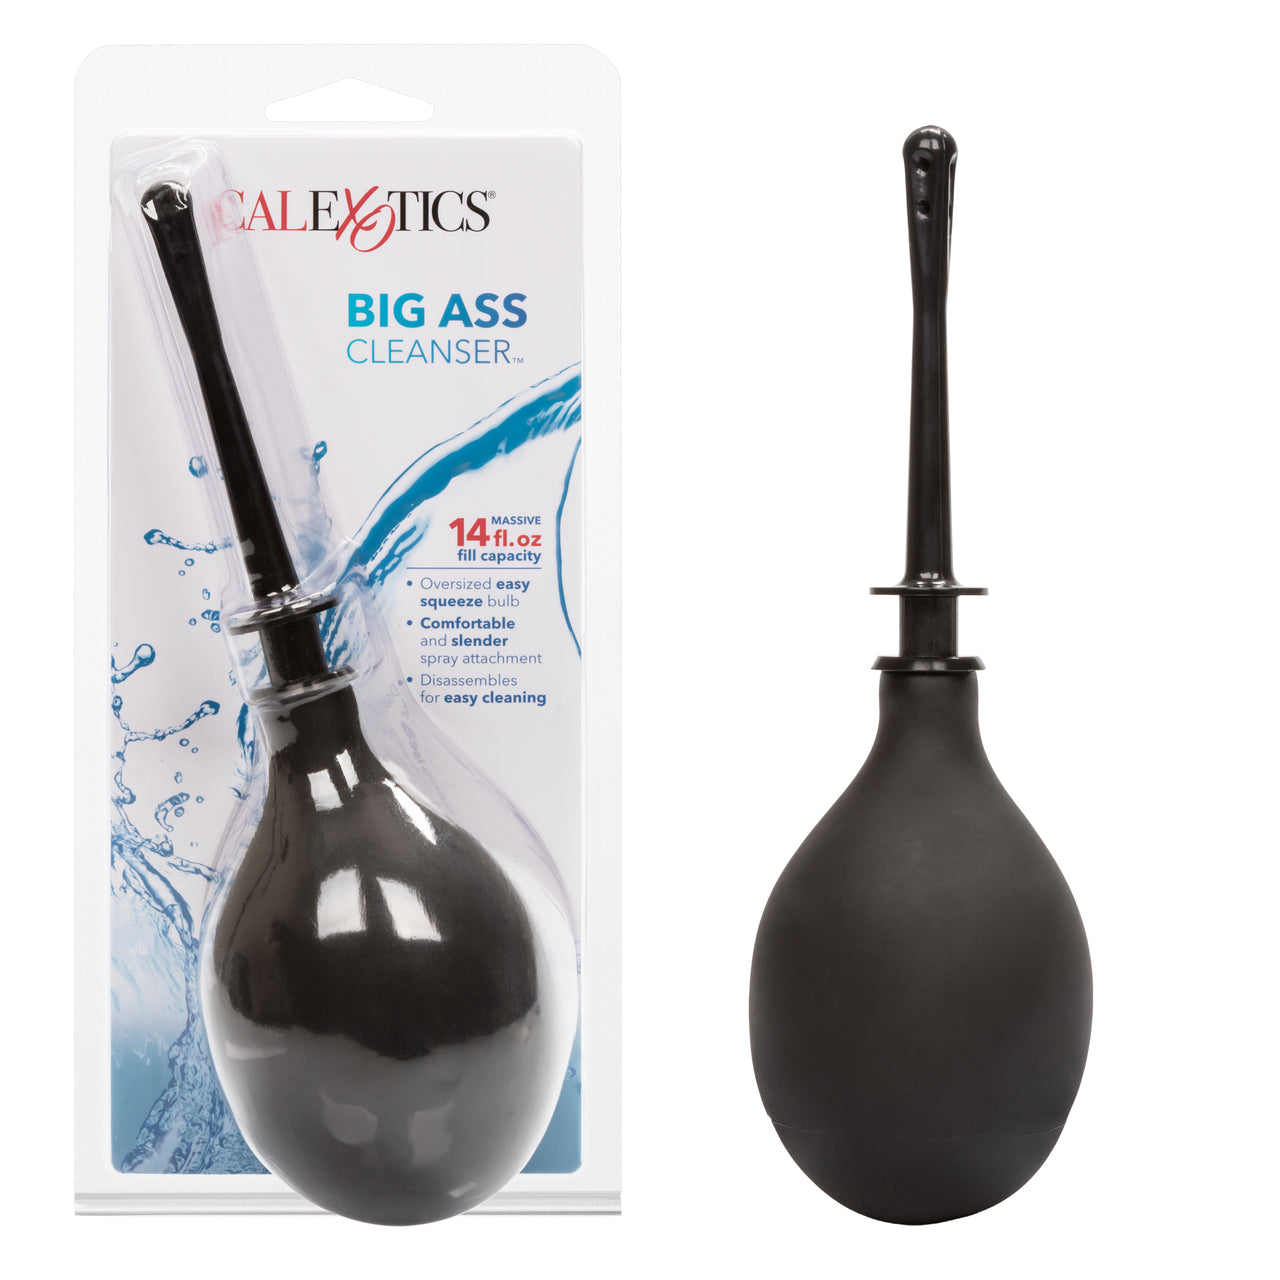 Big Ass Cleanser - Thorn & Feather Sex Toy Canada